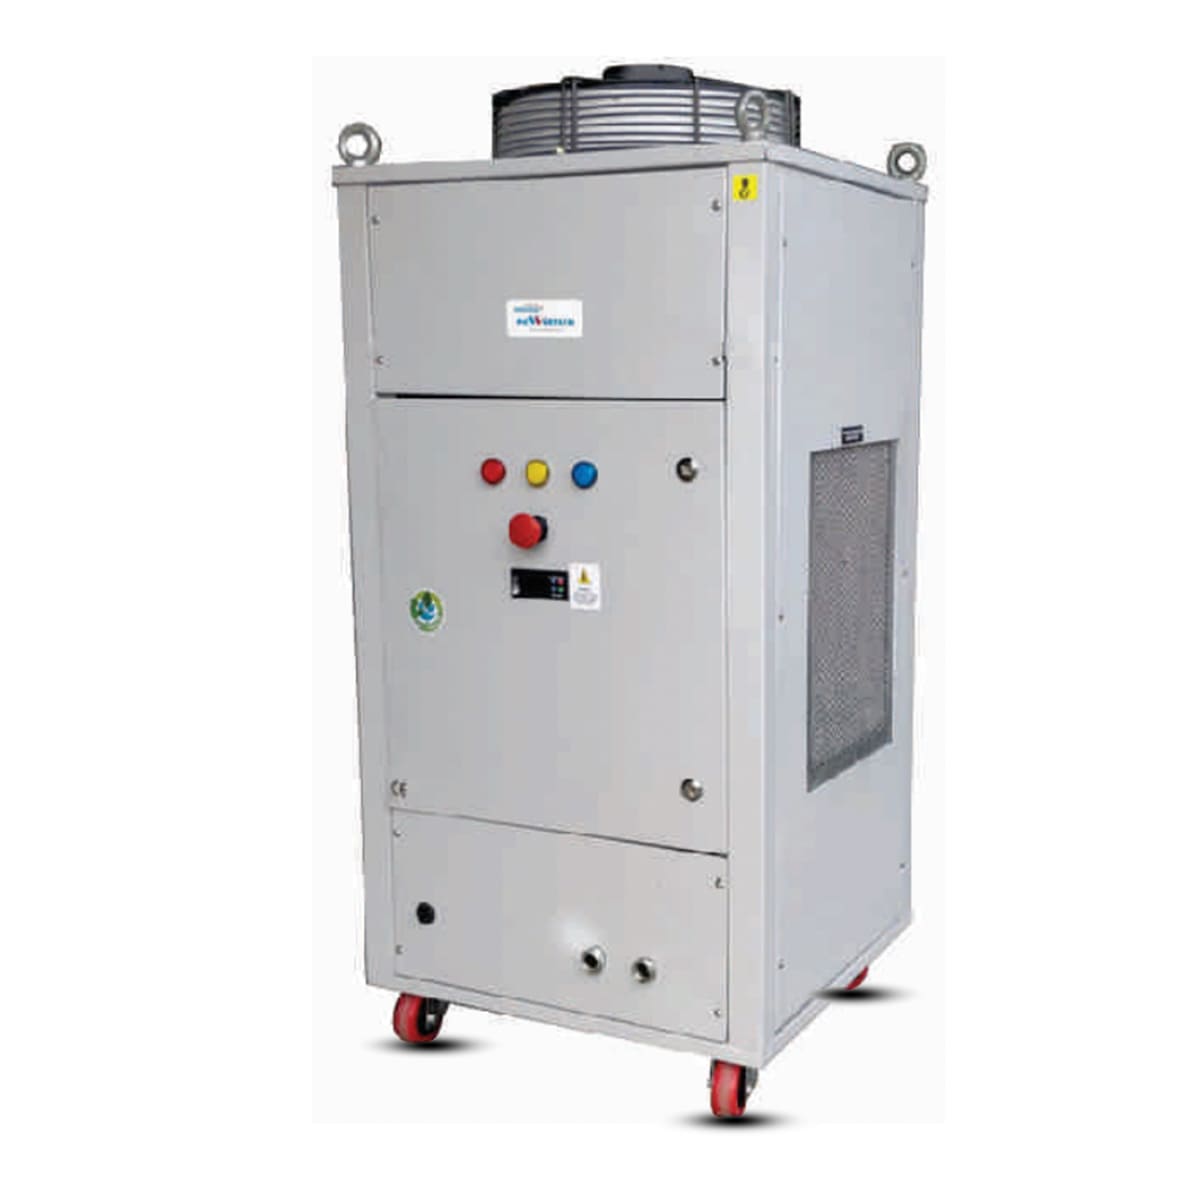 Oil & Coolant Chillers